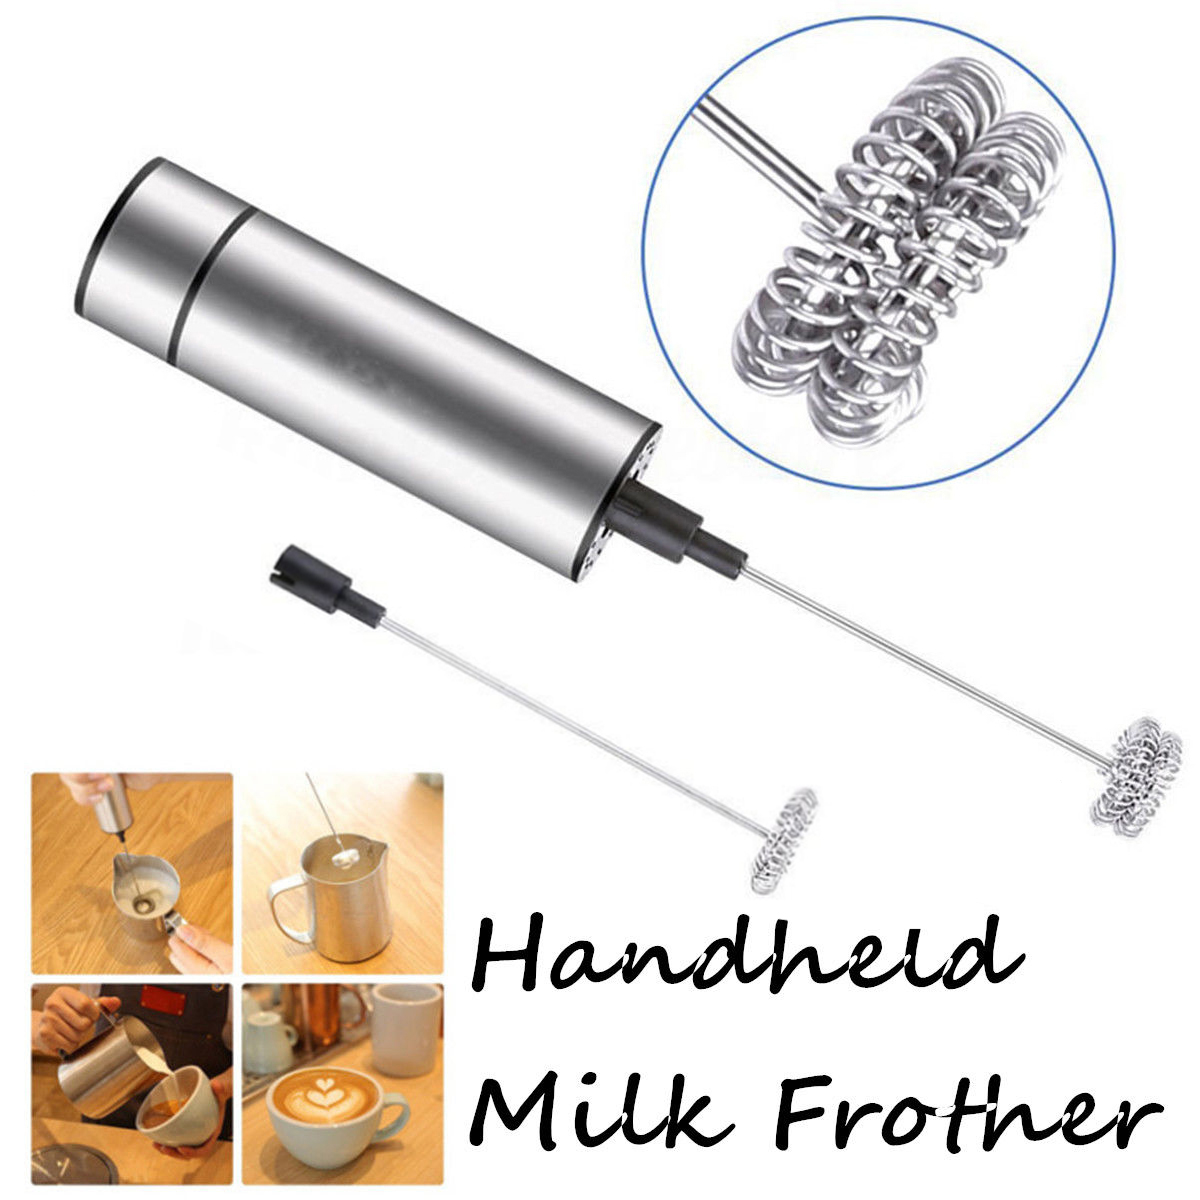 Electric-Handheld-Milk-Frother-Foamer-Mixer-Stainless-Steel-Coffee-Latte-Stirrer-Electric-Blender-1422297